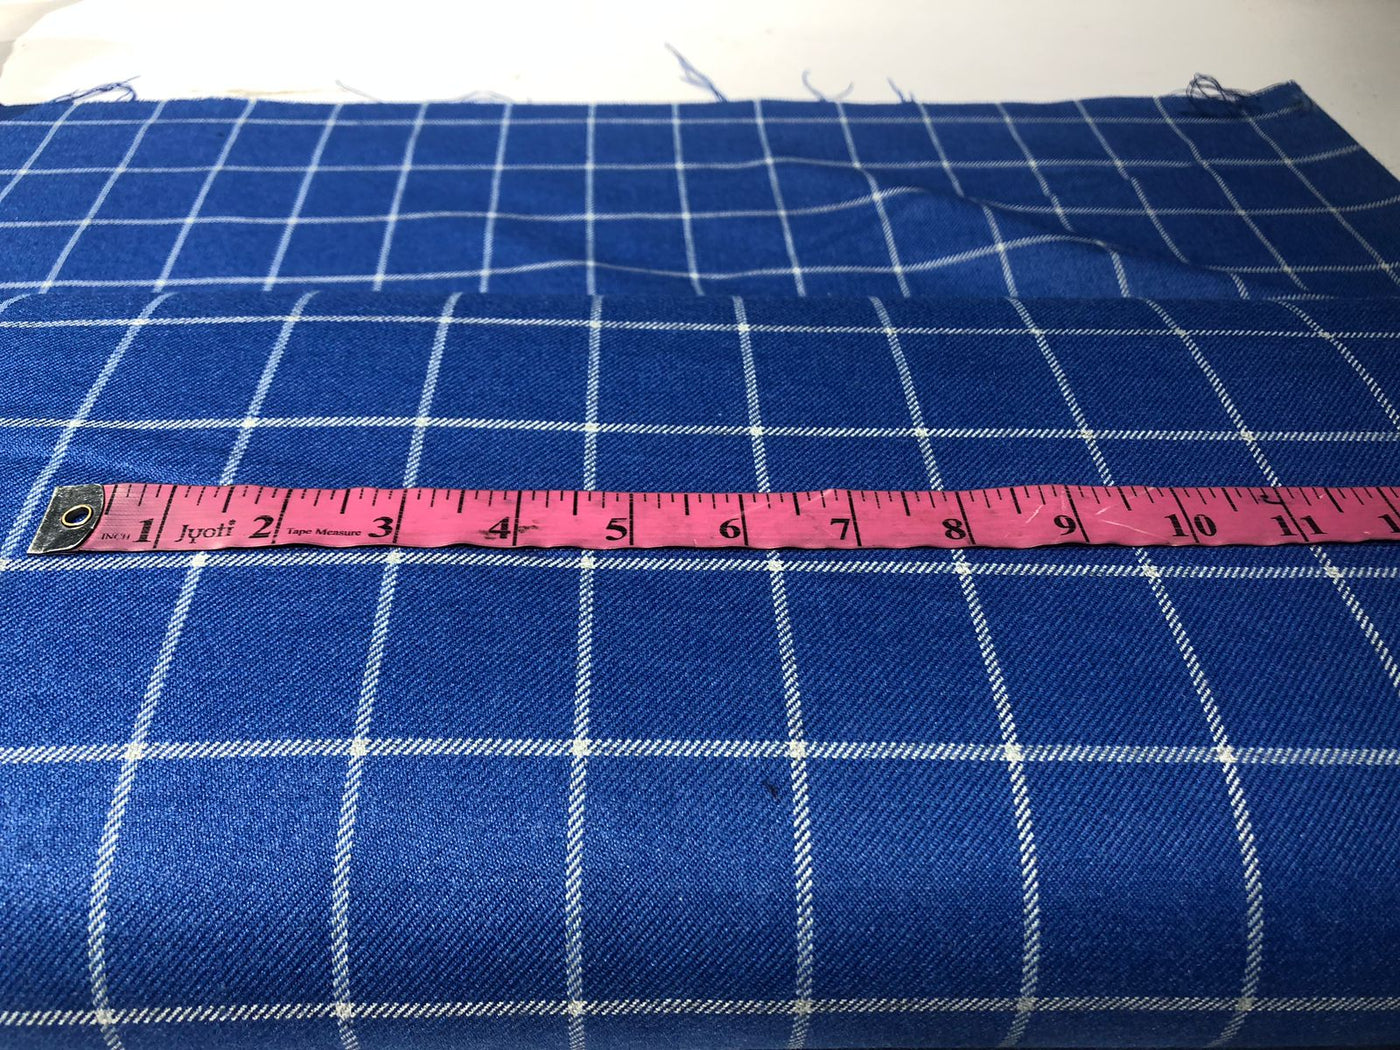 Light weight Suiting plaids TWEED Fabric 58" available in 5 colors BLACK WHITE DARK, RED BLACK, BEIGE BROWN, BLACK WHITE LIGHT,BLUE WHITE[15647-15650/15655]